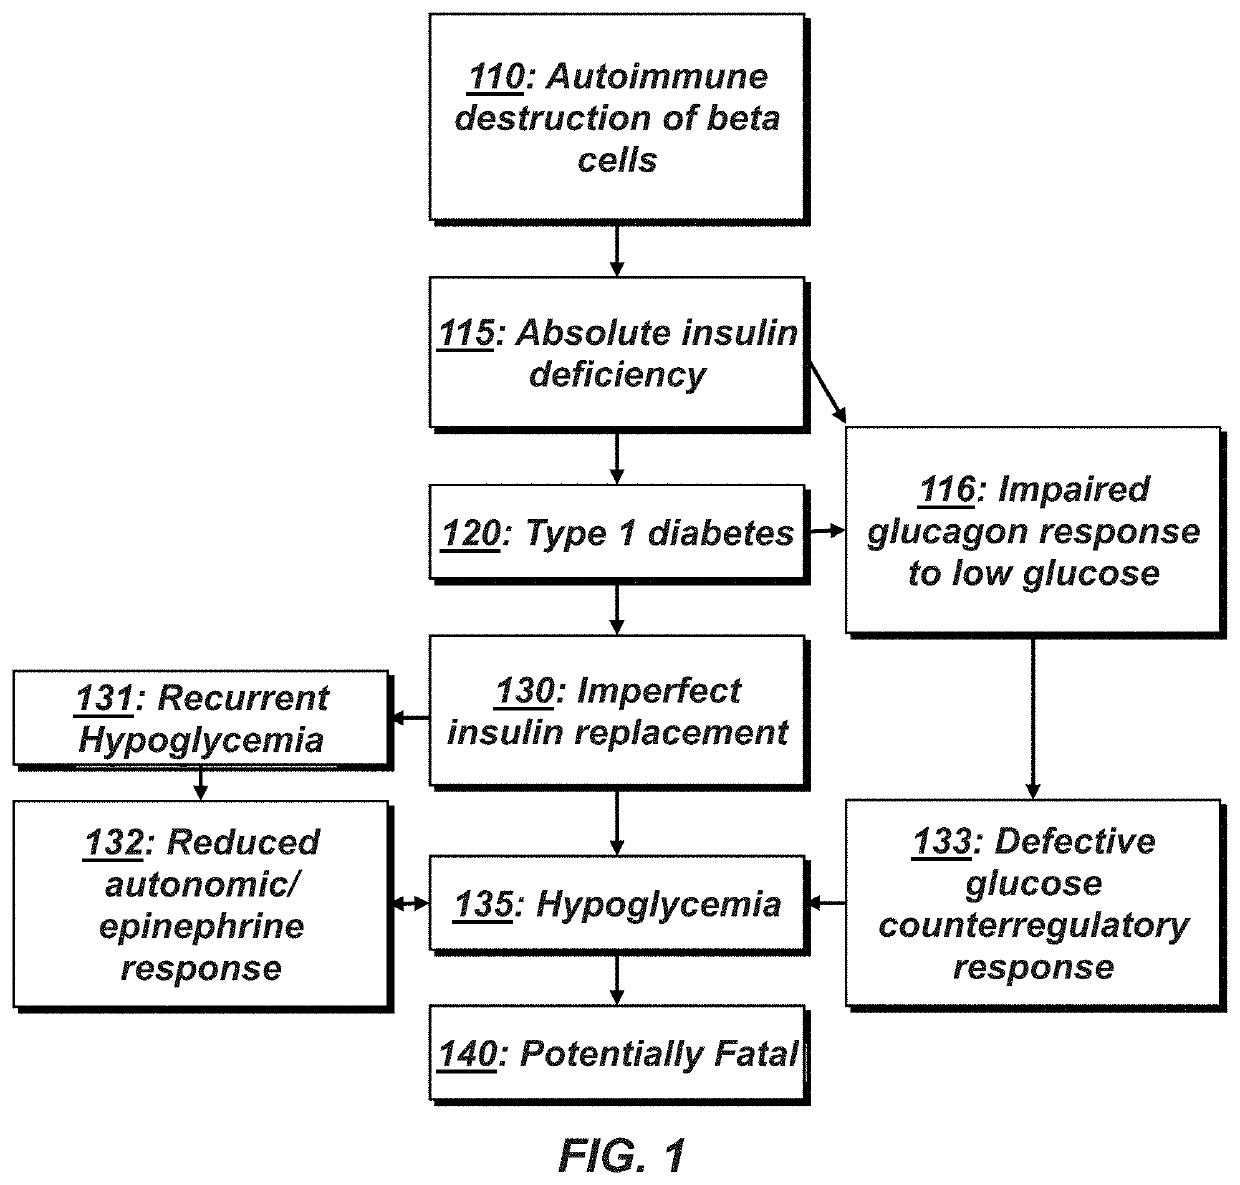 Methods of preventing and treating hypoglycemia in type 1 and type 2 diabetes patients